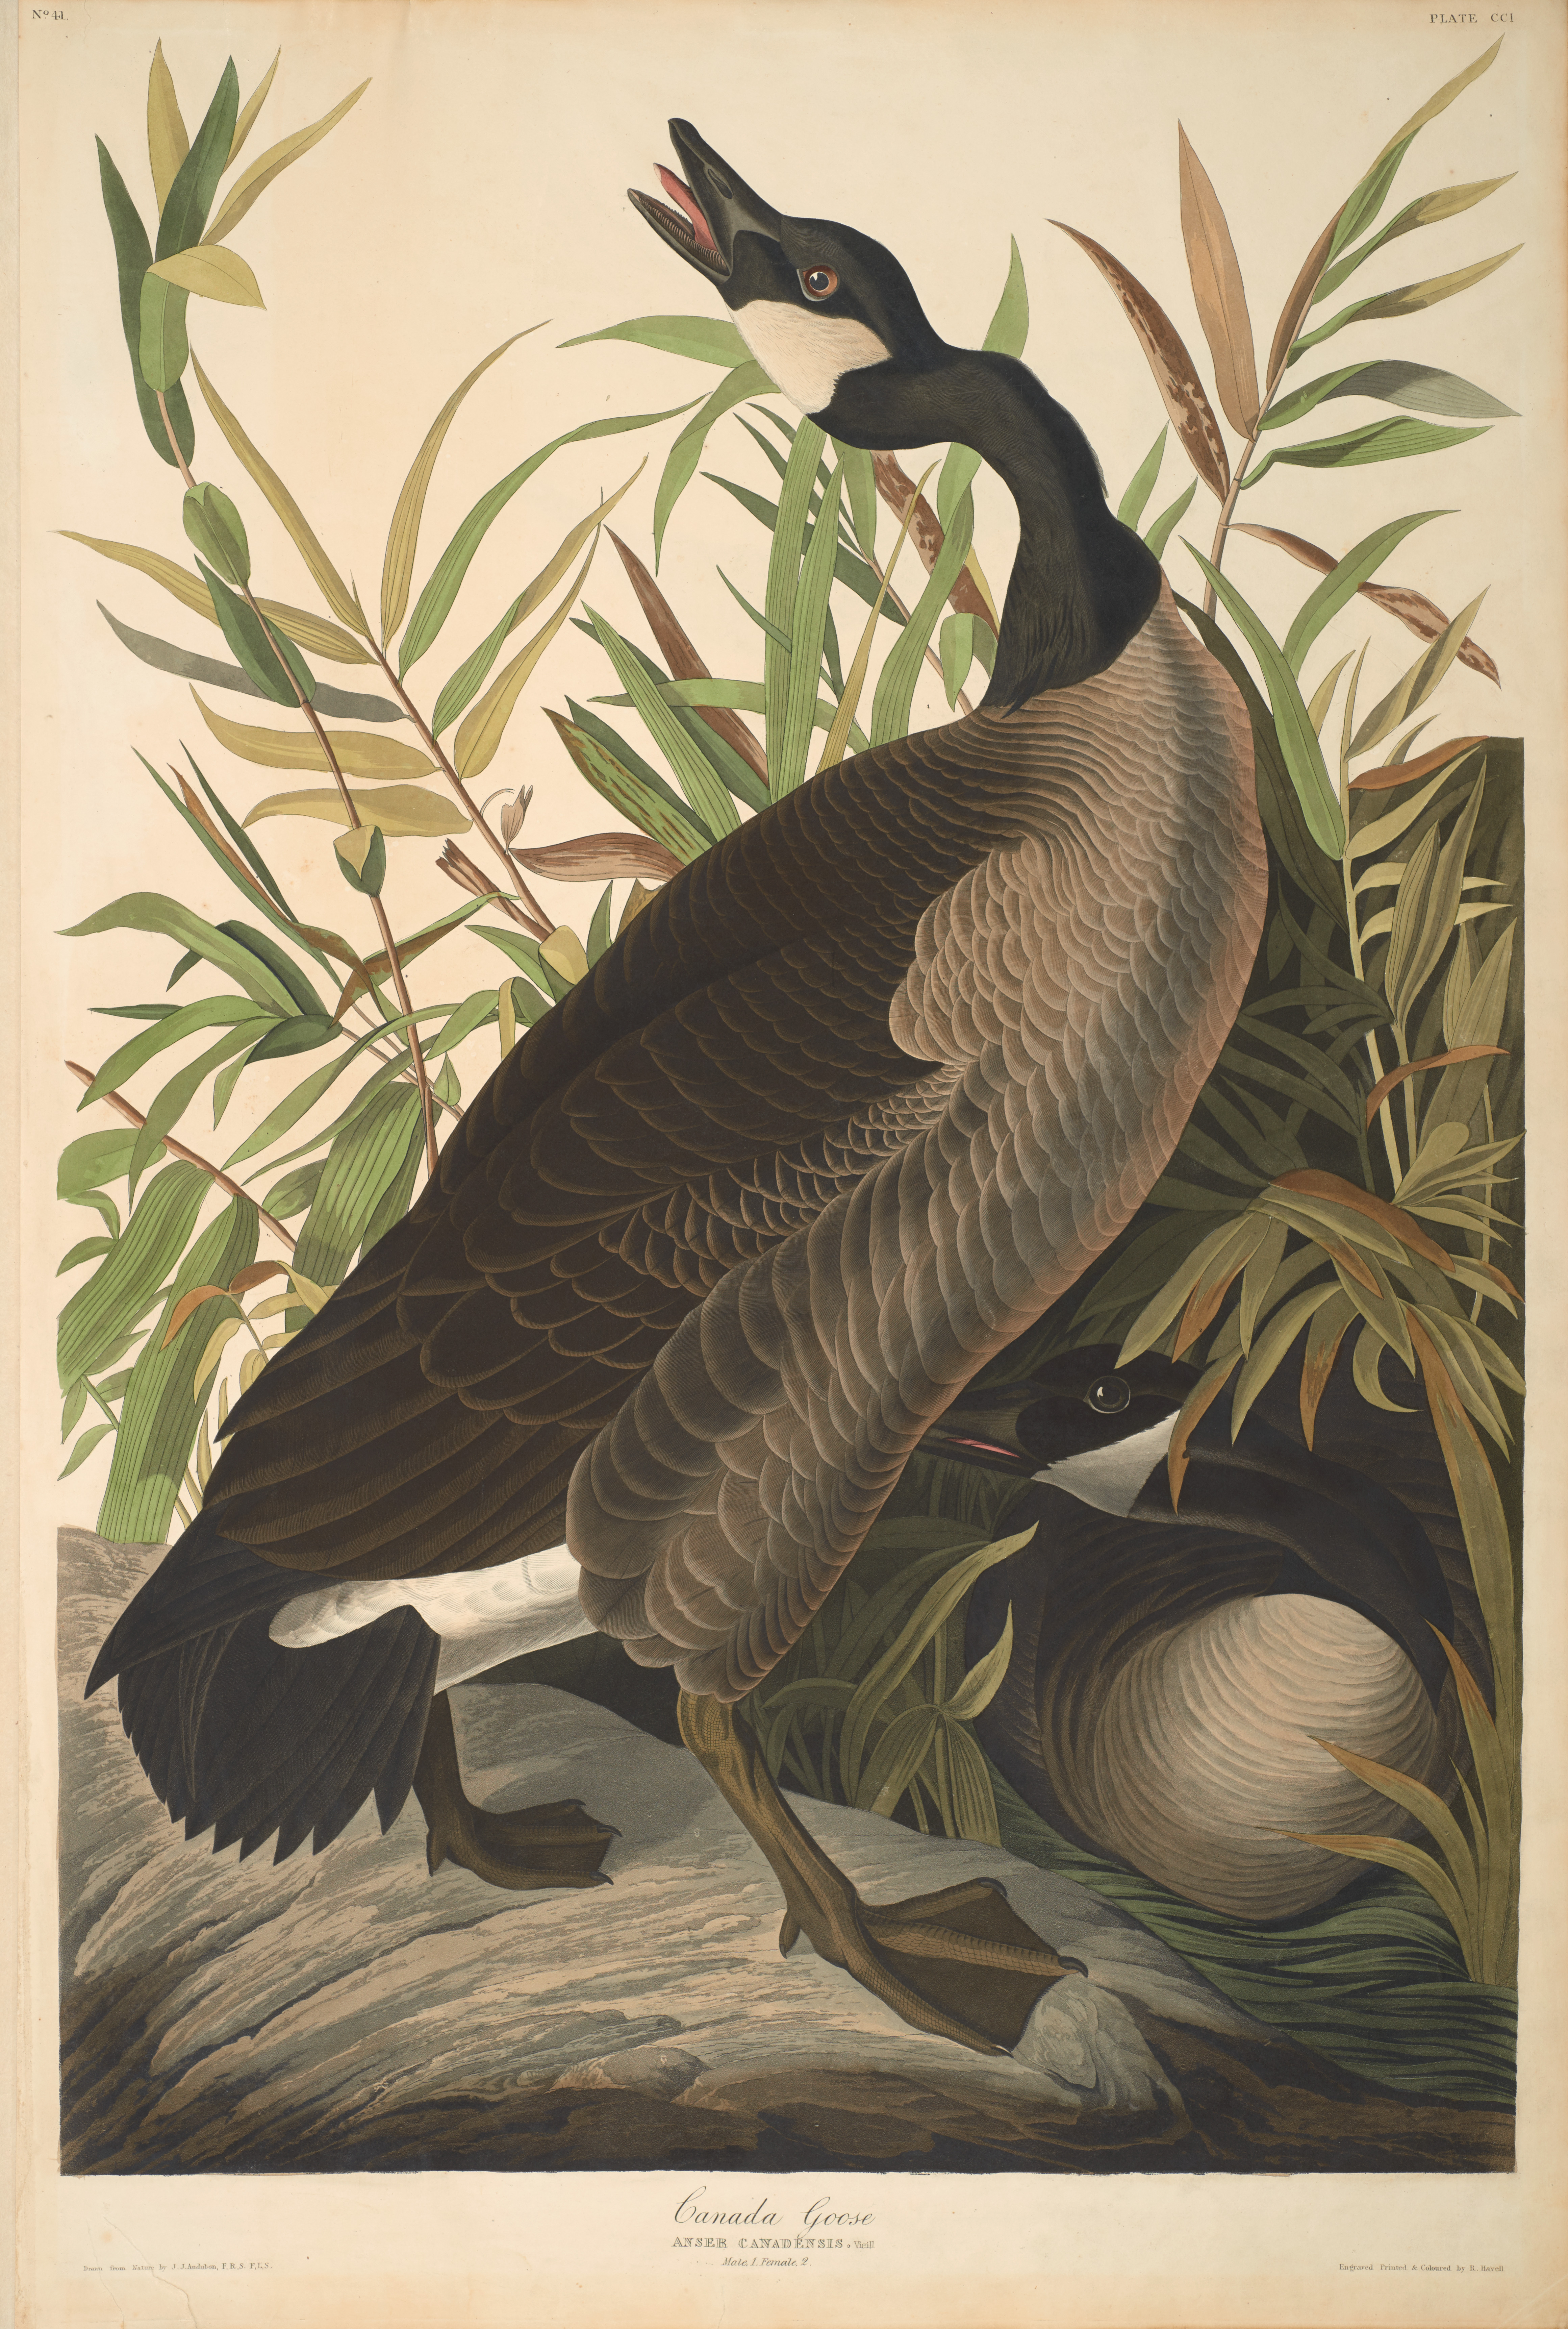 John James Audubon, Canada Goose, from The Birds of America, 1827 – 38 , hand - colored aquatint/engraving on paper , 40 x 26 in., North Carolina Museum of Art, Transfer from the North Carolina State Library